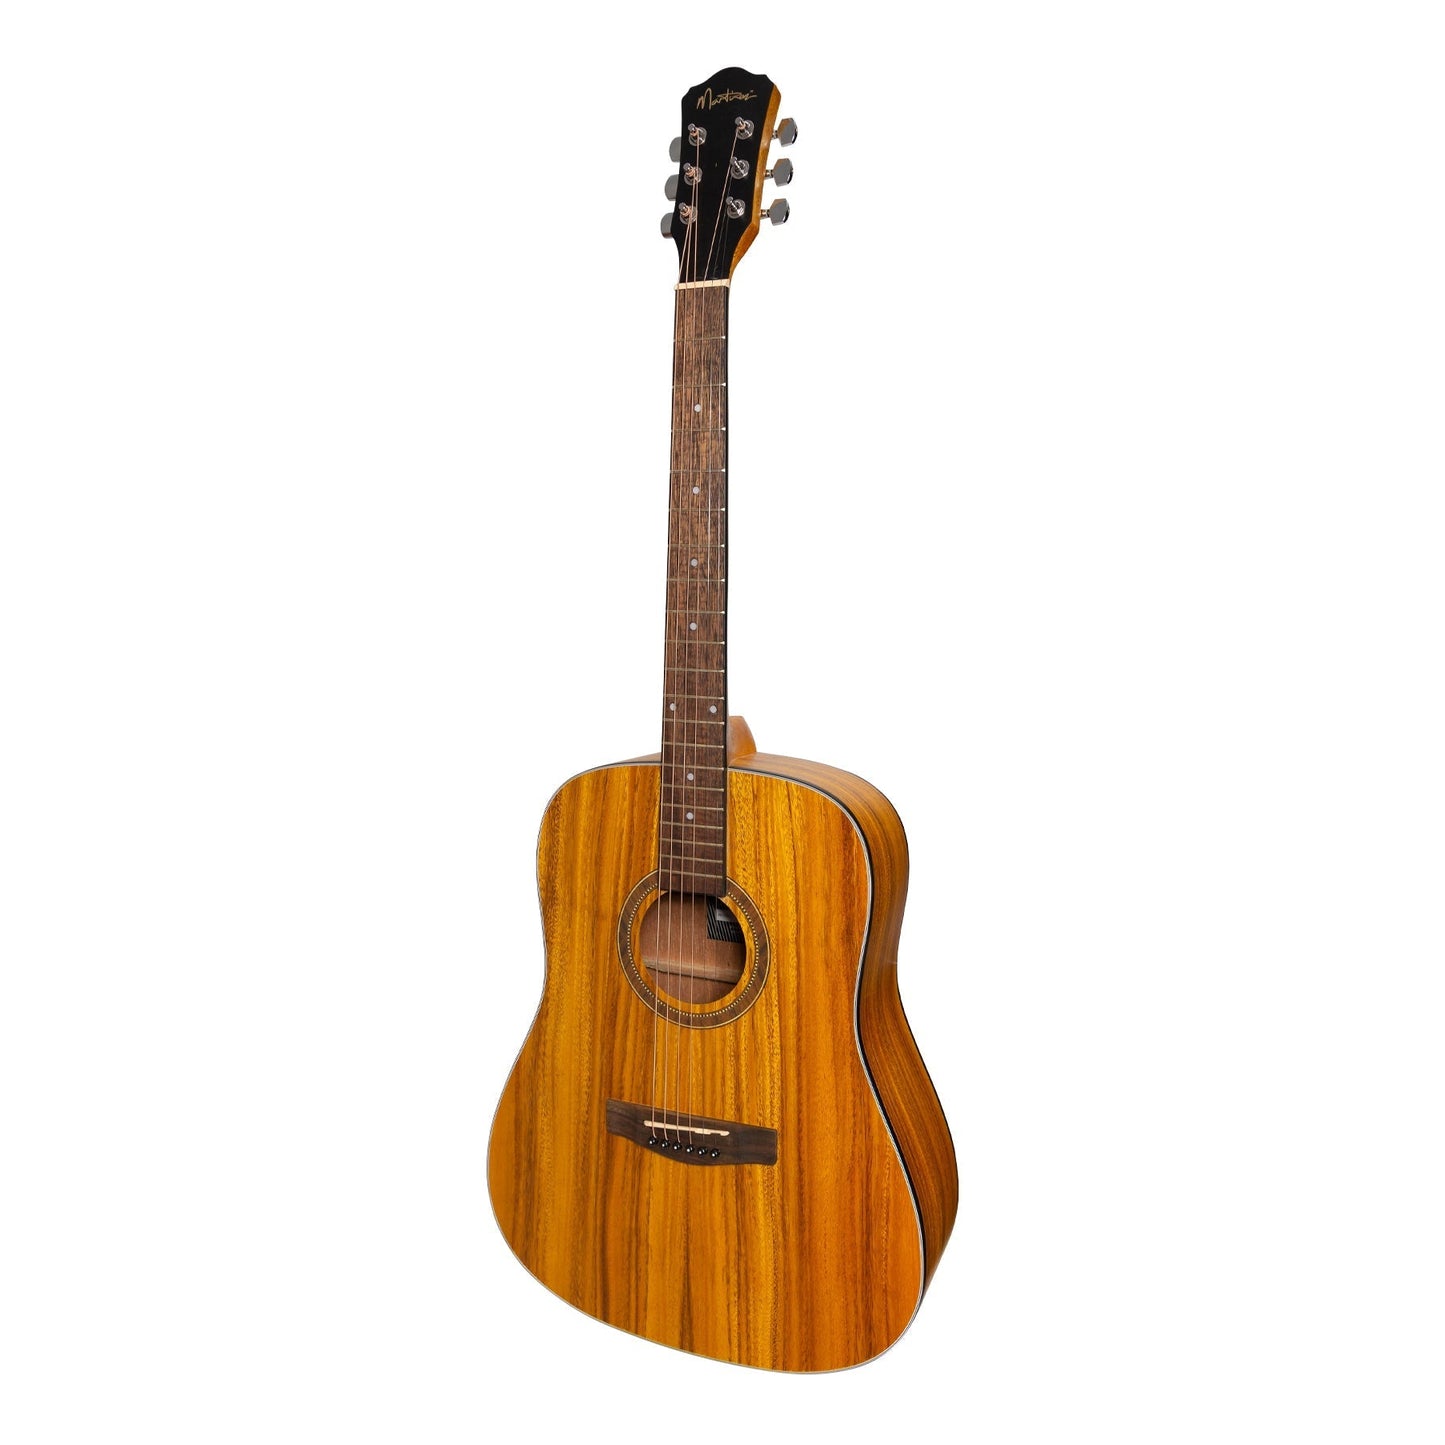 Martinez '41 Series' Dreadnought Acoustic Guitar Pack with Built-in Tuner (Koa)